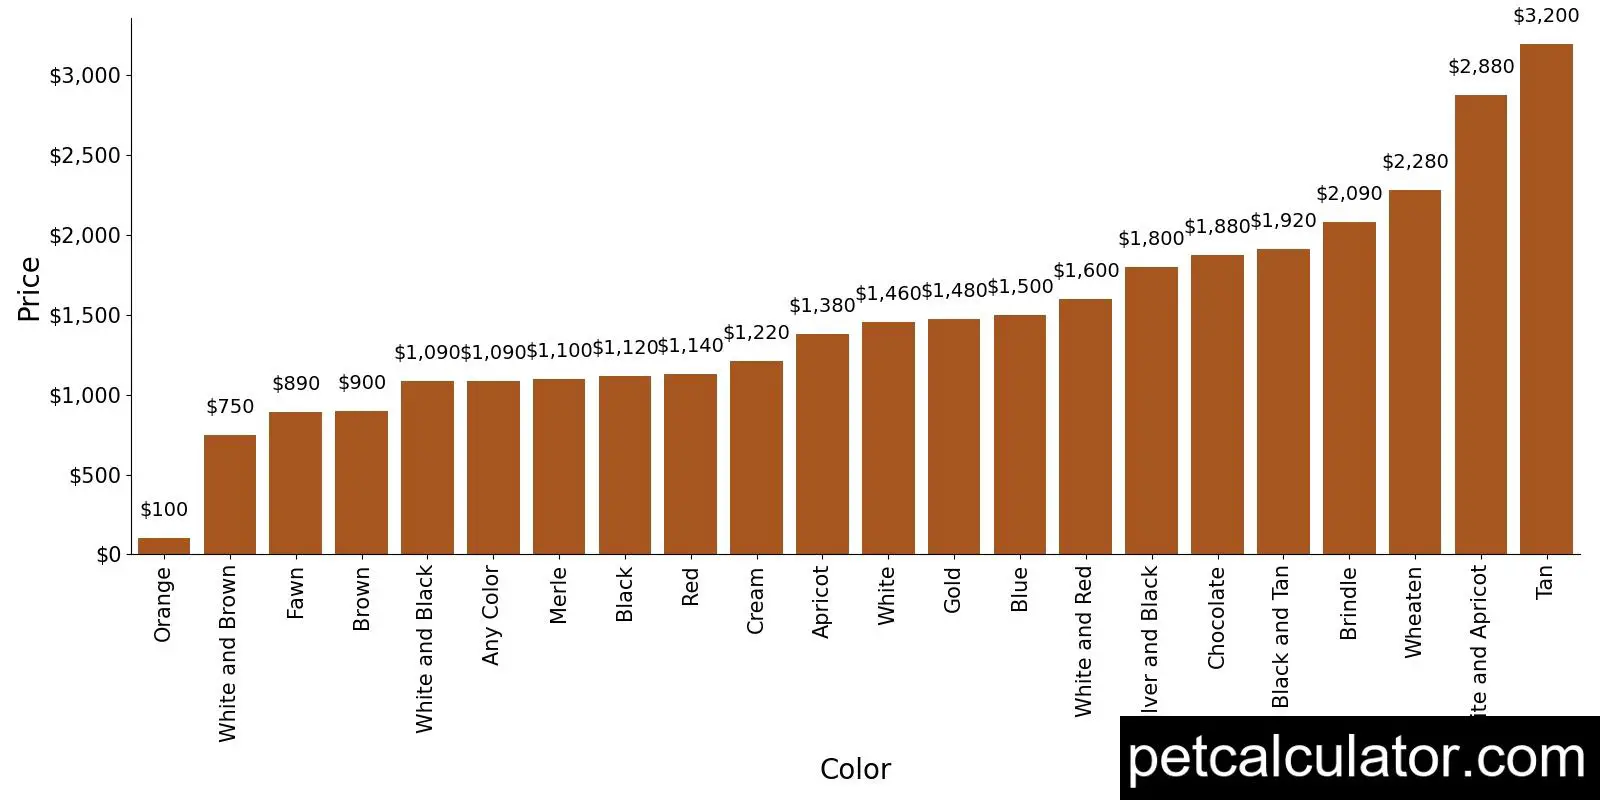 Price of Designer Breed Small by Color 